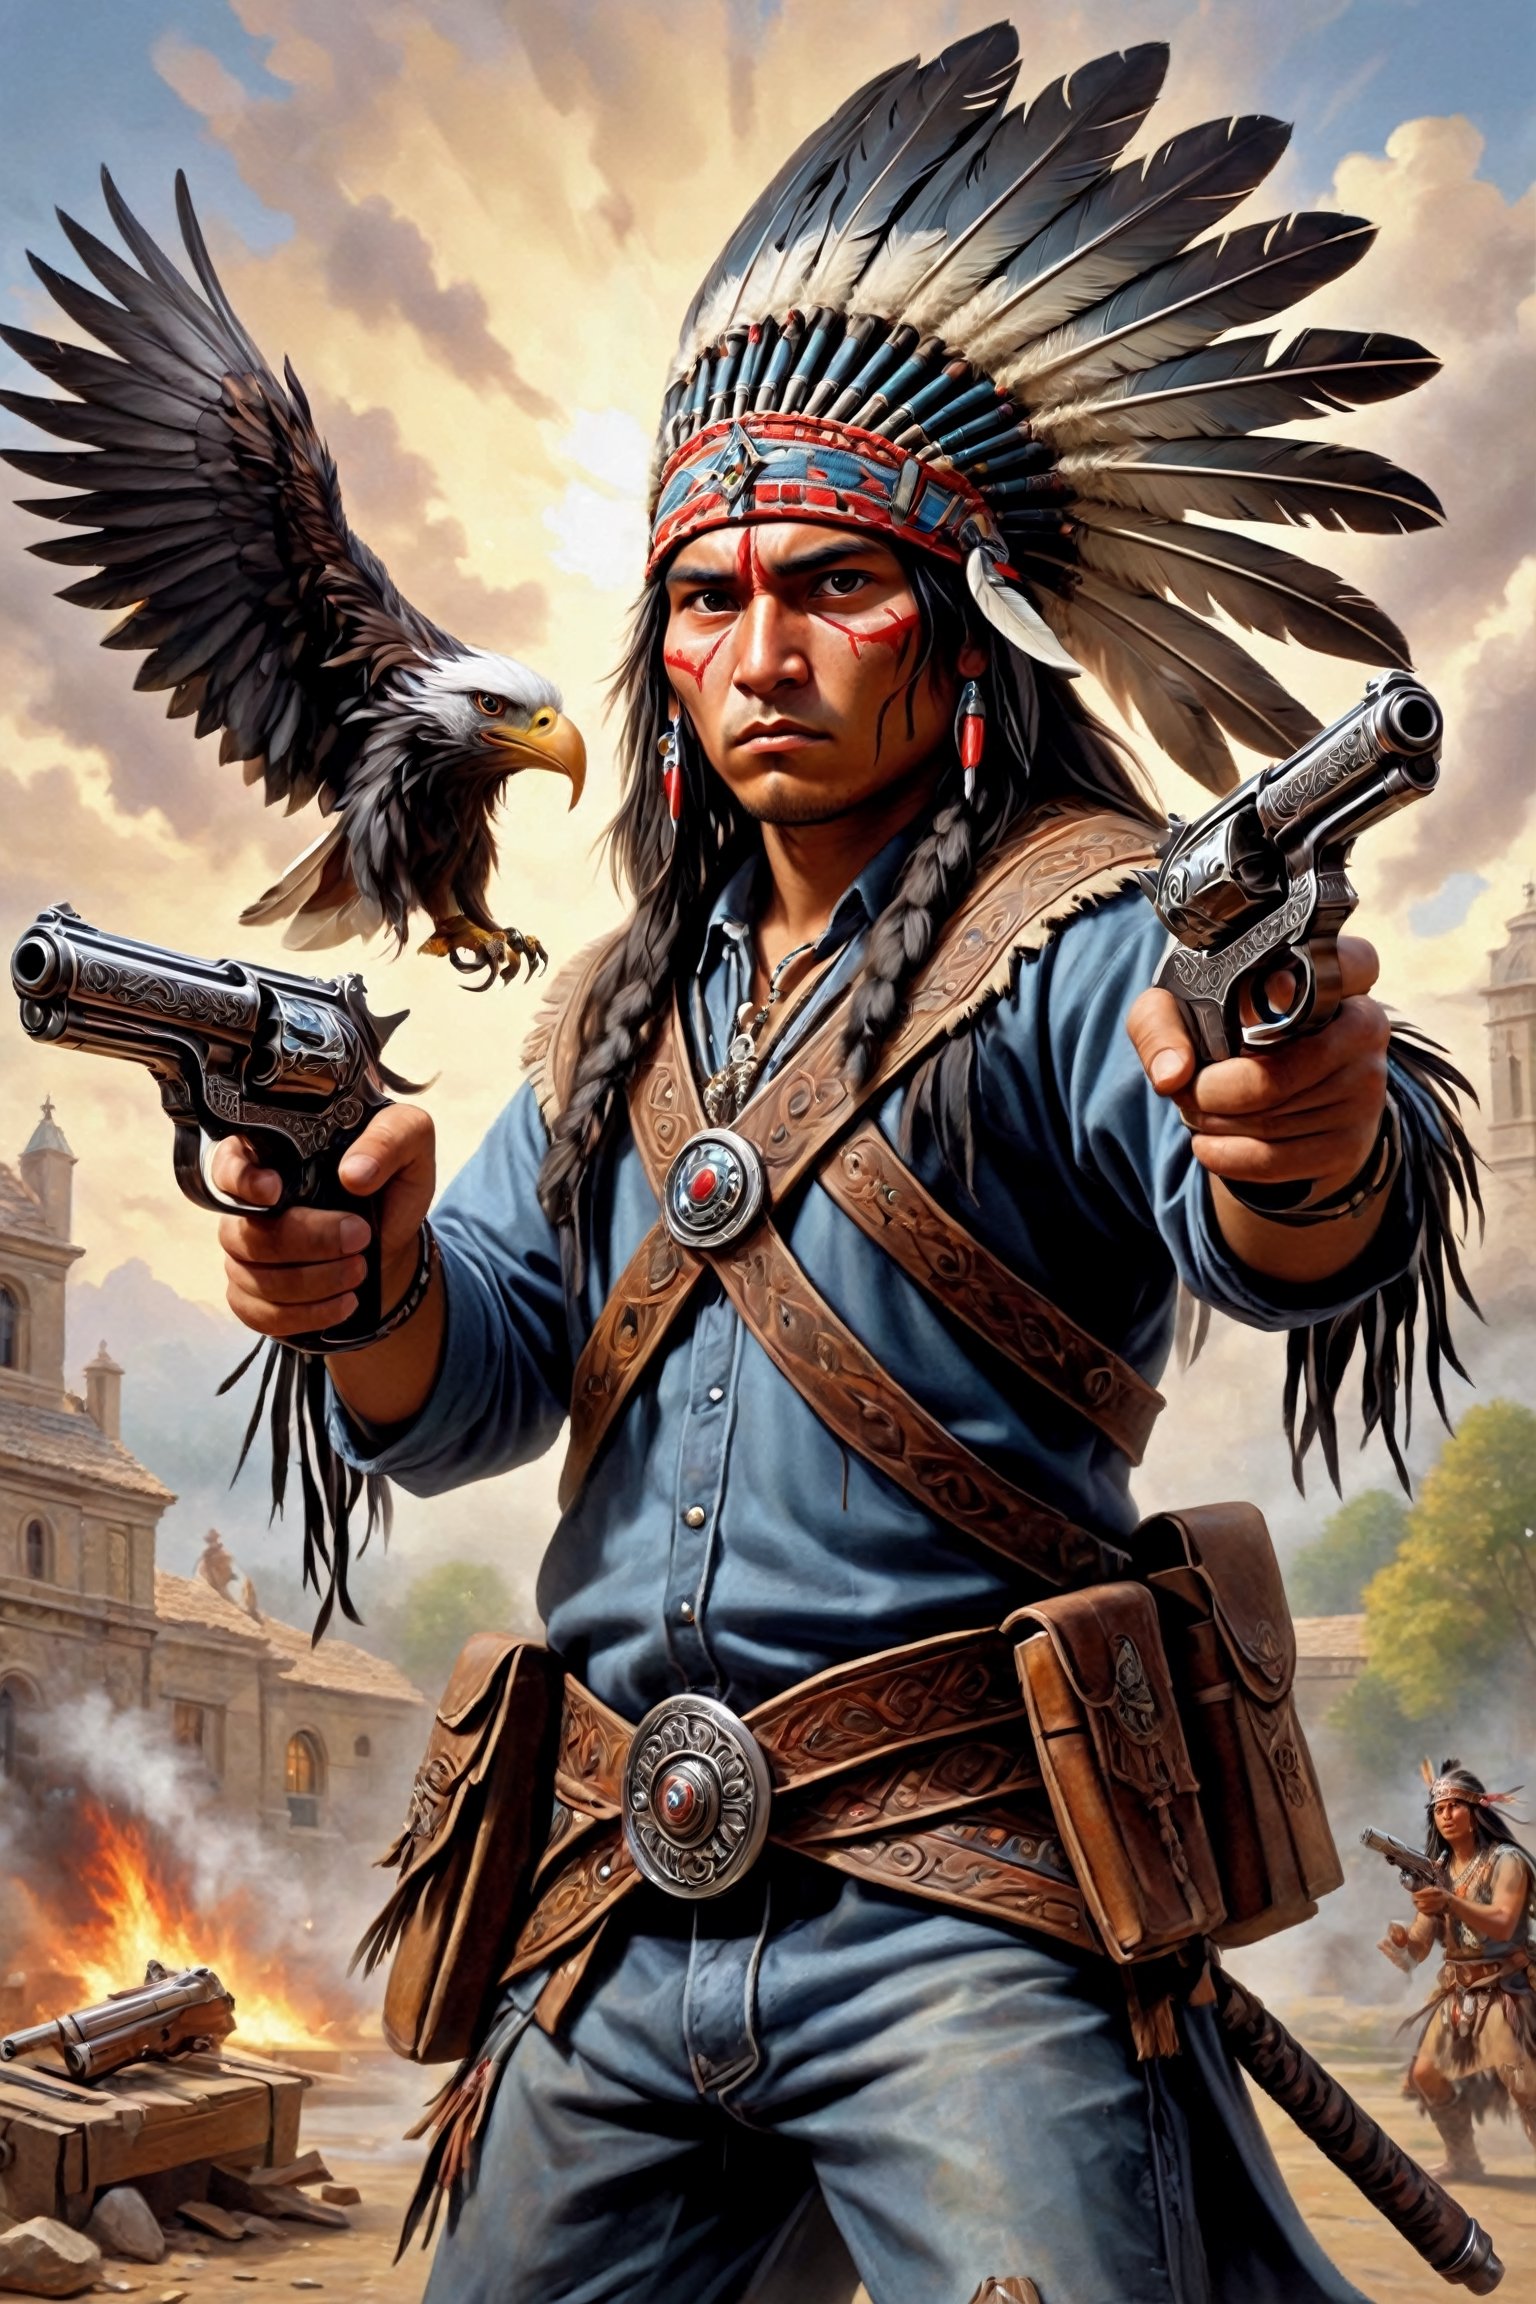 Hard-boiled atmosphere, oil art,1man, young Native American warrior,A sharp gaze full of anger, traditional Native American costume, war bonnet, eagle feather,Dual pistol in each hand,strikes a dynamic Akimbo pose,Dual_wield,Oil painting of Mona Lisa ,abmhandsomeguy,dual pistols